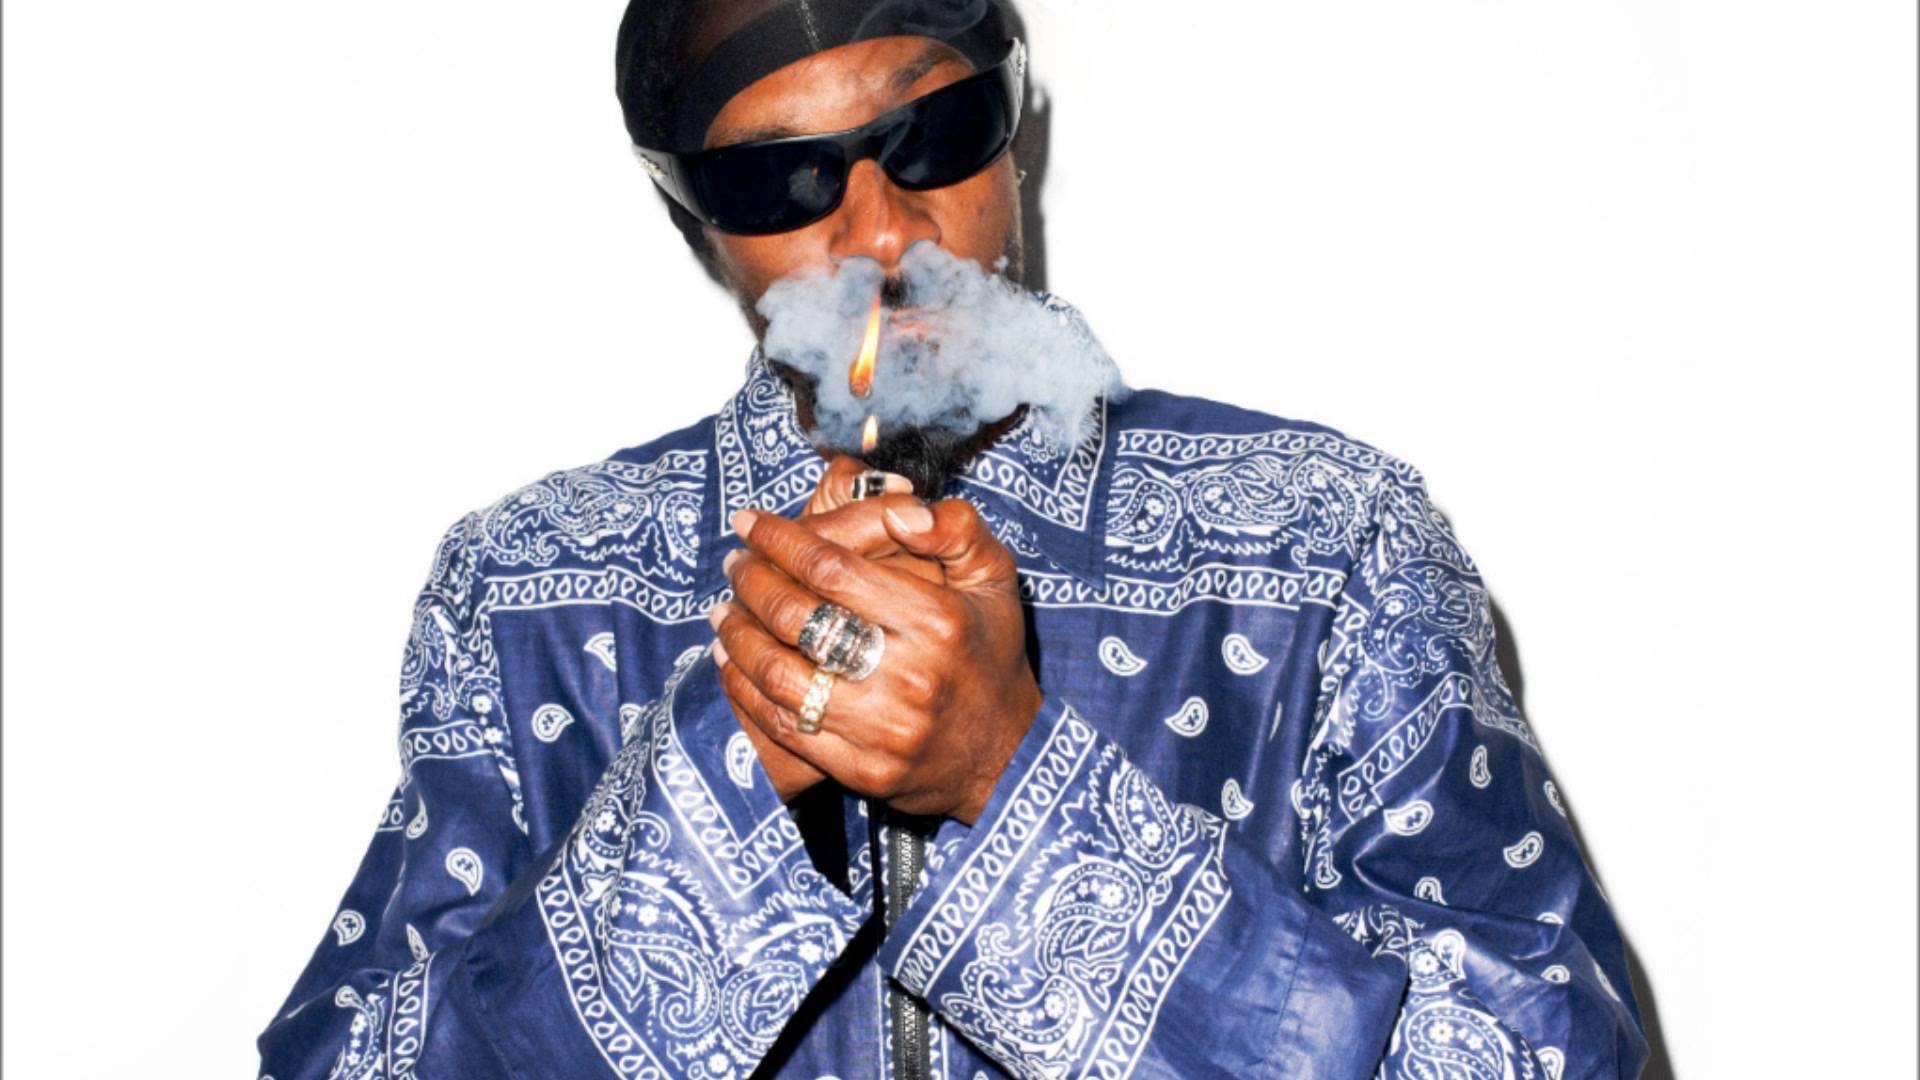 Free download Displaying 13 Images For Snoop Dogg Crip Wallpaper